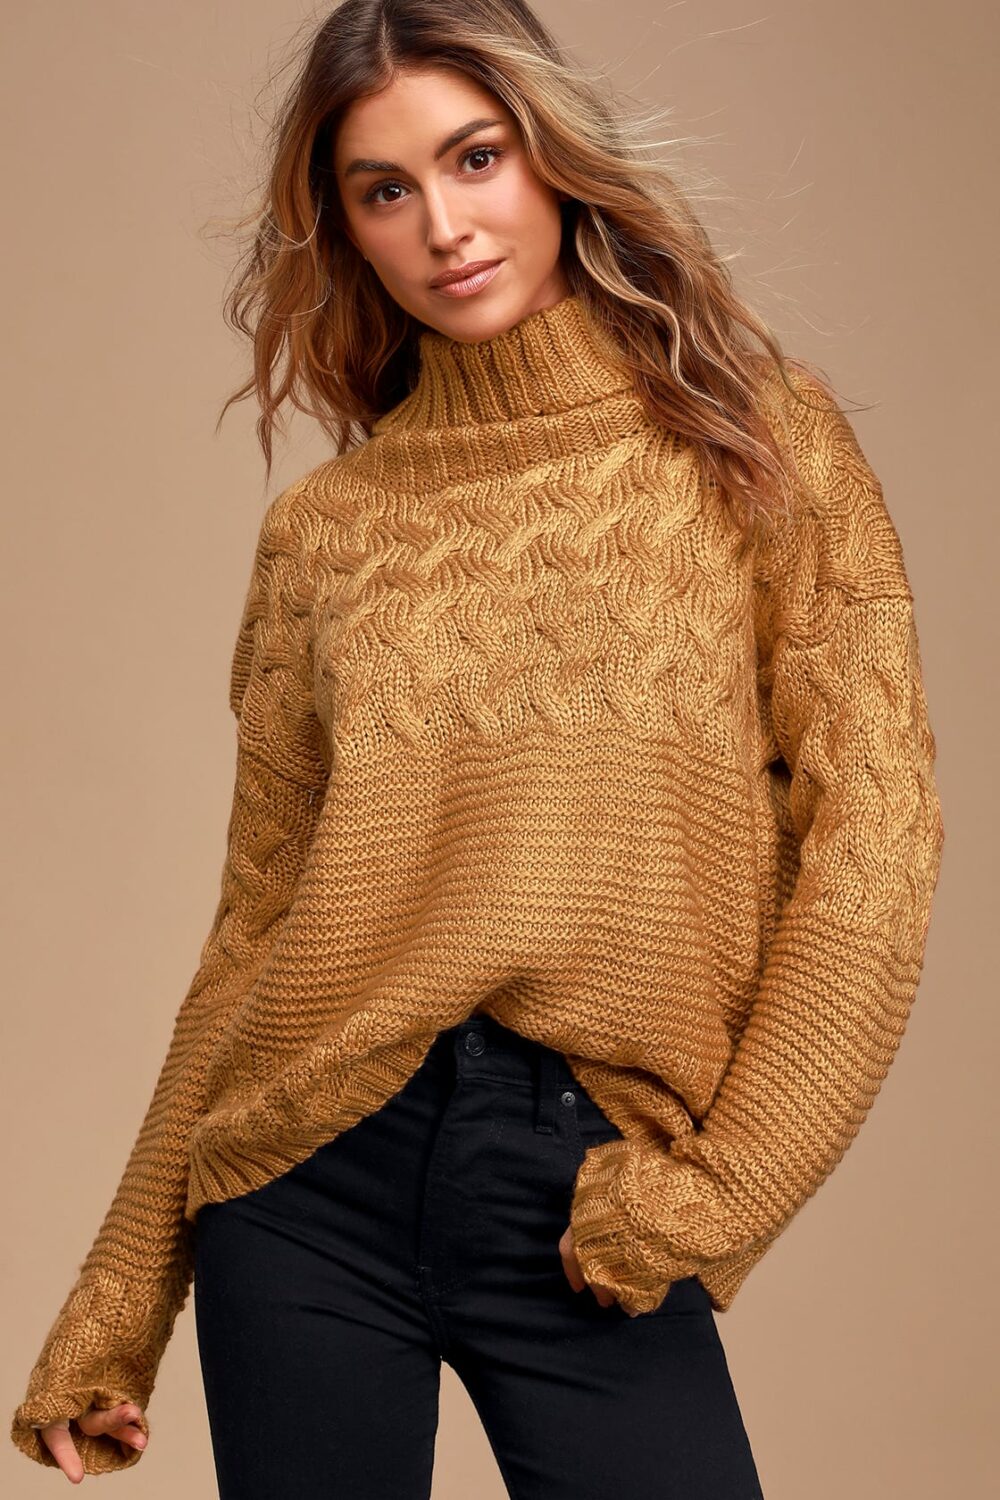 Adoring Heart Camel Knit Turtleneck Sweater will make you feel like the most cozy person in the world. With a big boxy body a really soft sweater is designed for the fall winter season.